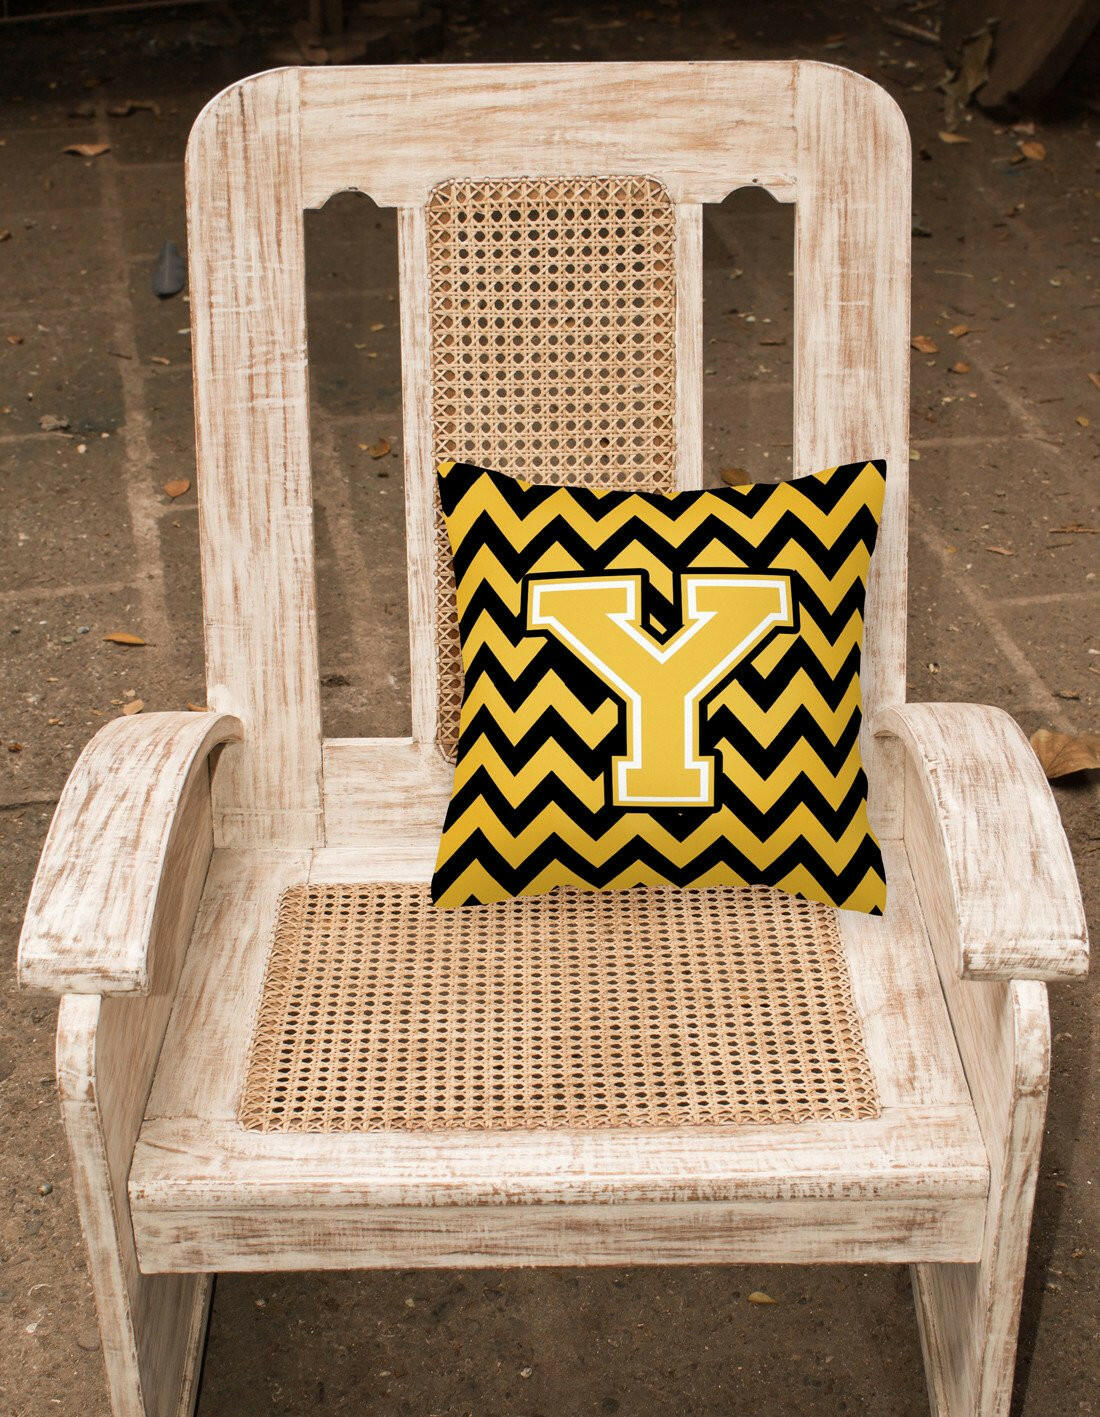 Letter Y Chevron Black and Gold Fabric Decorative Pillow CJ1053-YPW1414 by Caroline's Treasures